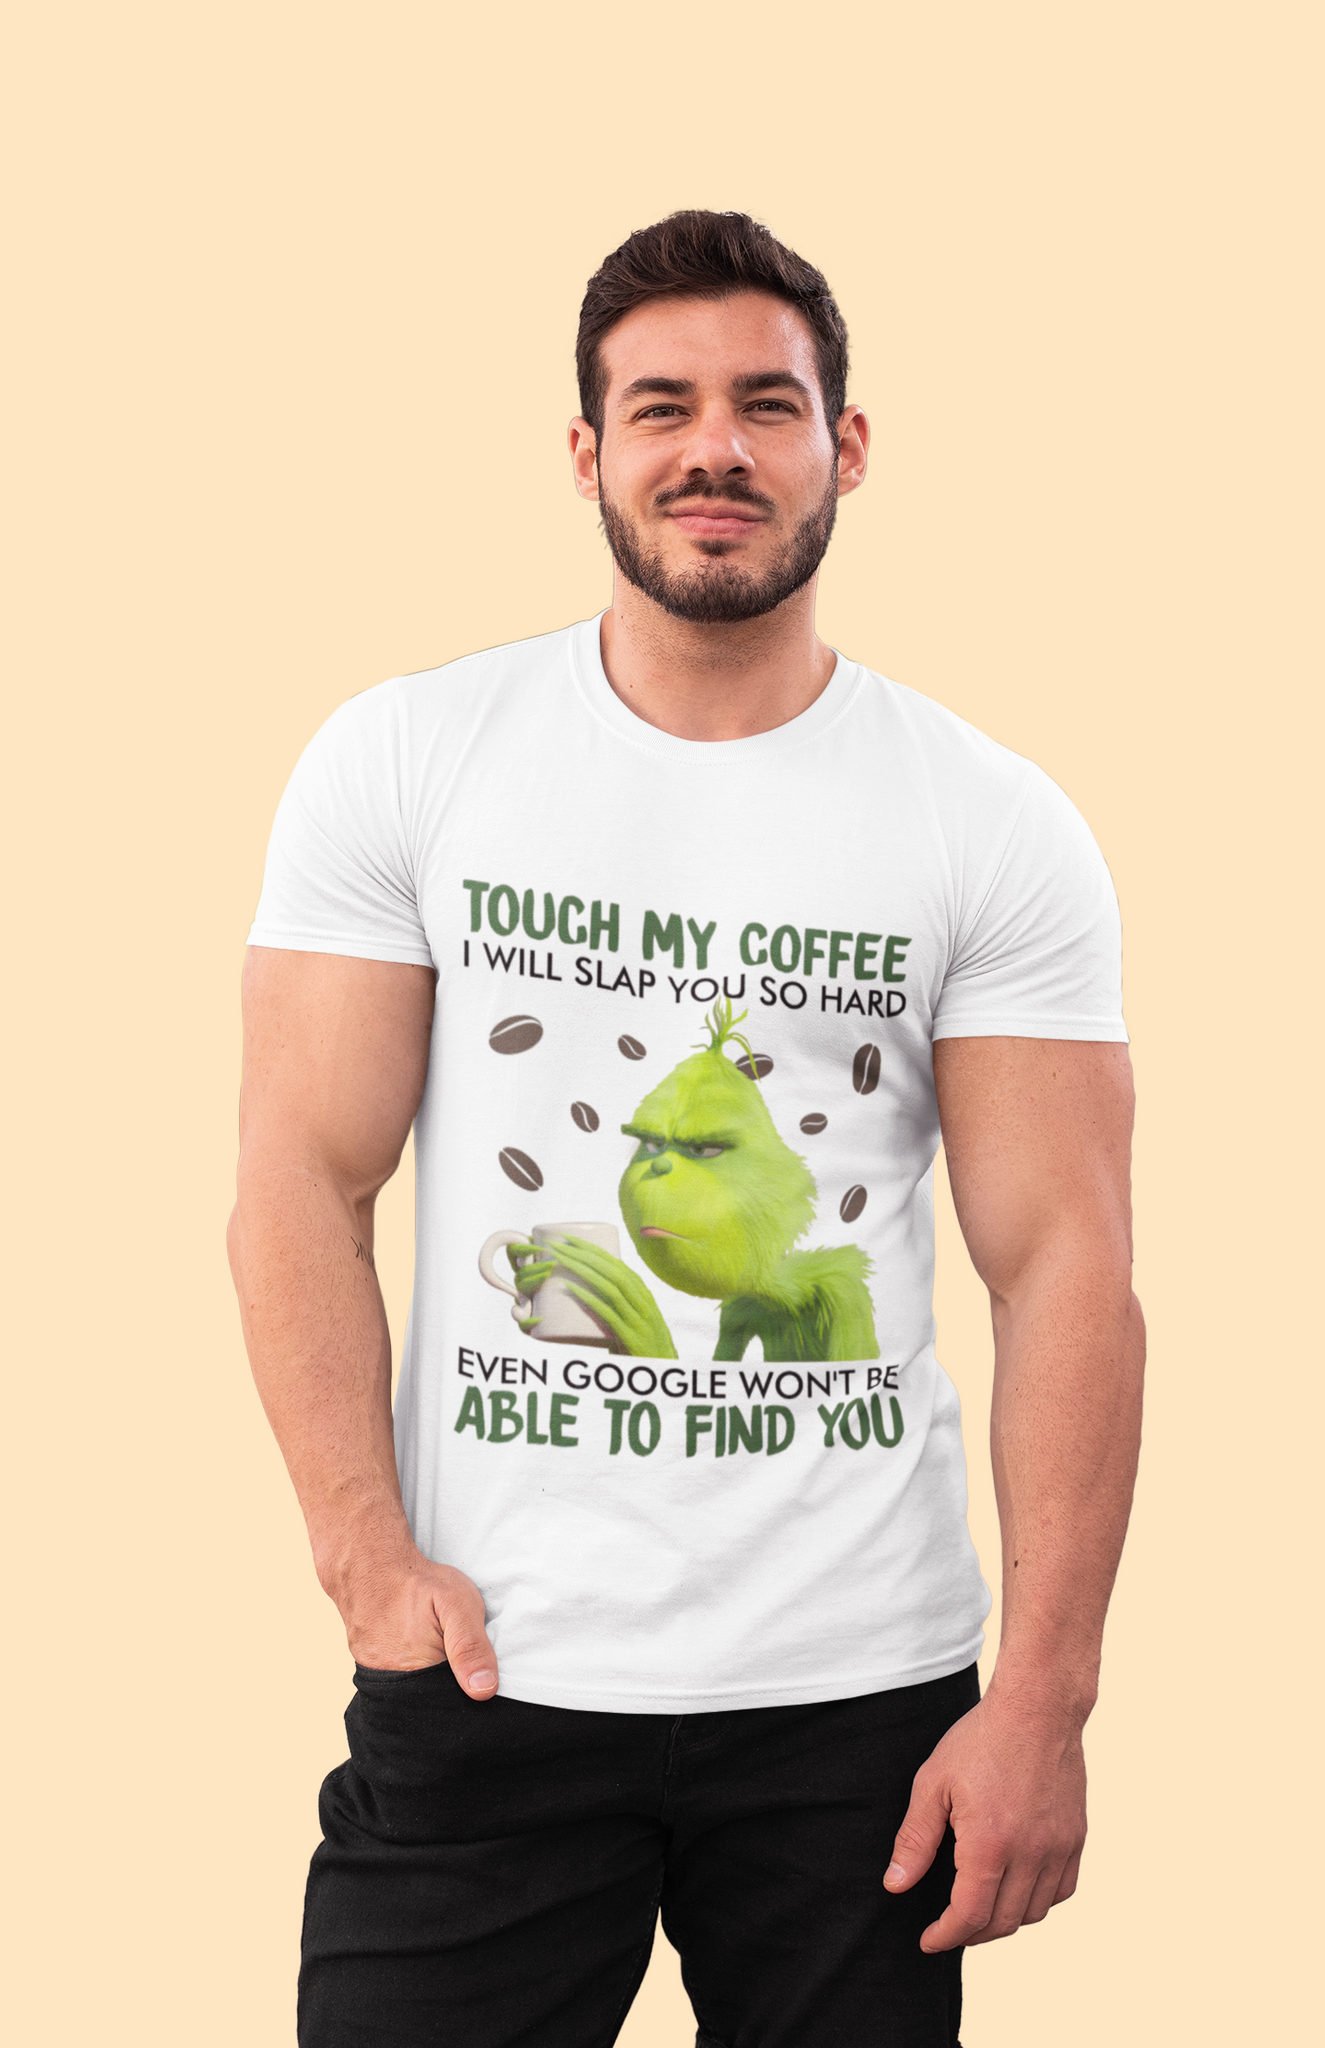 Grinch T Shirt, Touch My Coffee I Will Slap You So Hard T Shirt, Even Google Wont Be Able To Find You Tshirt, Christmas Gifts